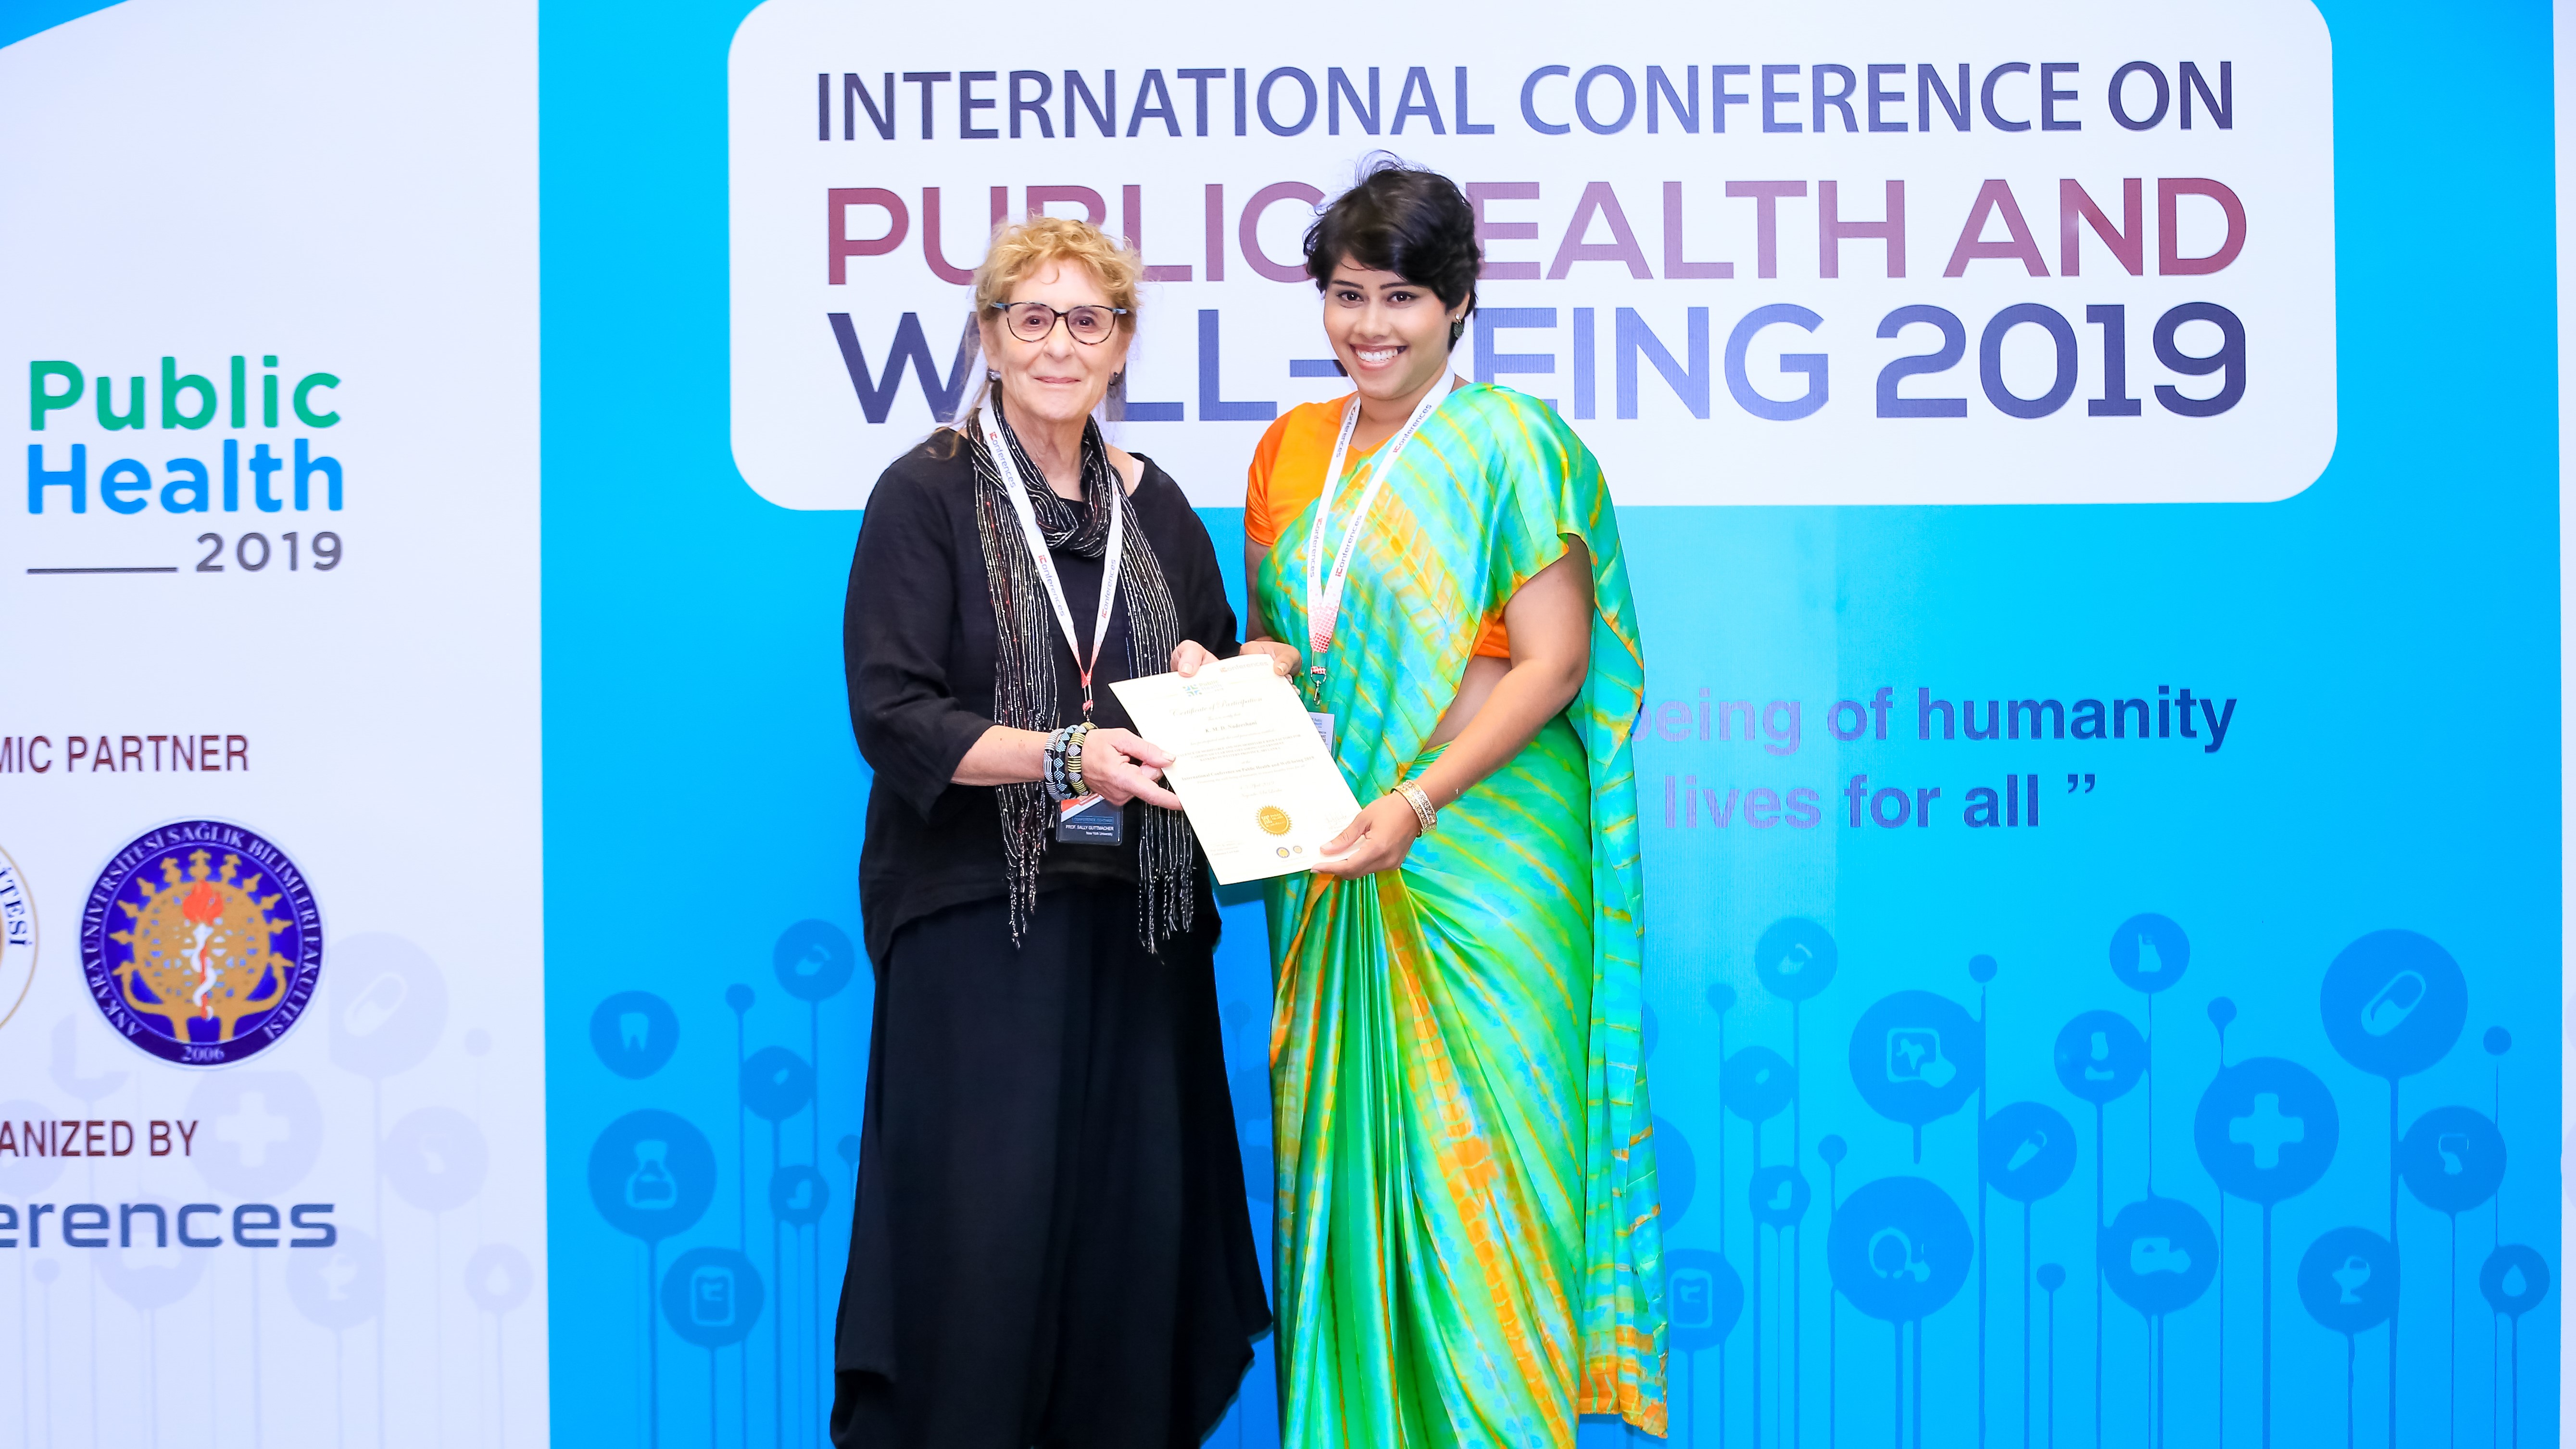 2nd International Conference on Public Health and Well-being 2020, Kuala Lumpur, Malaysia